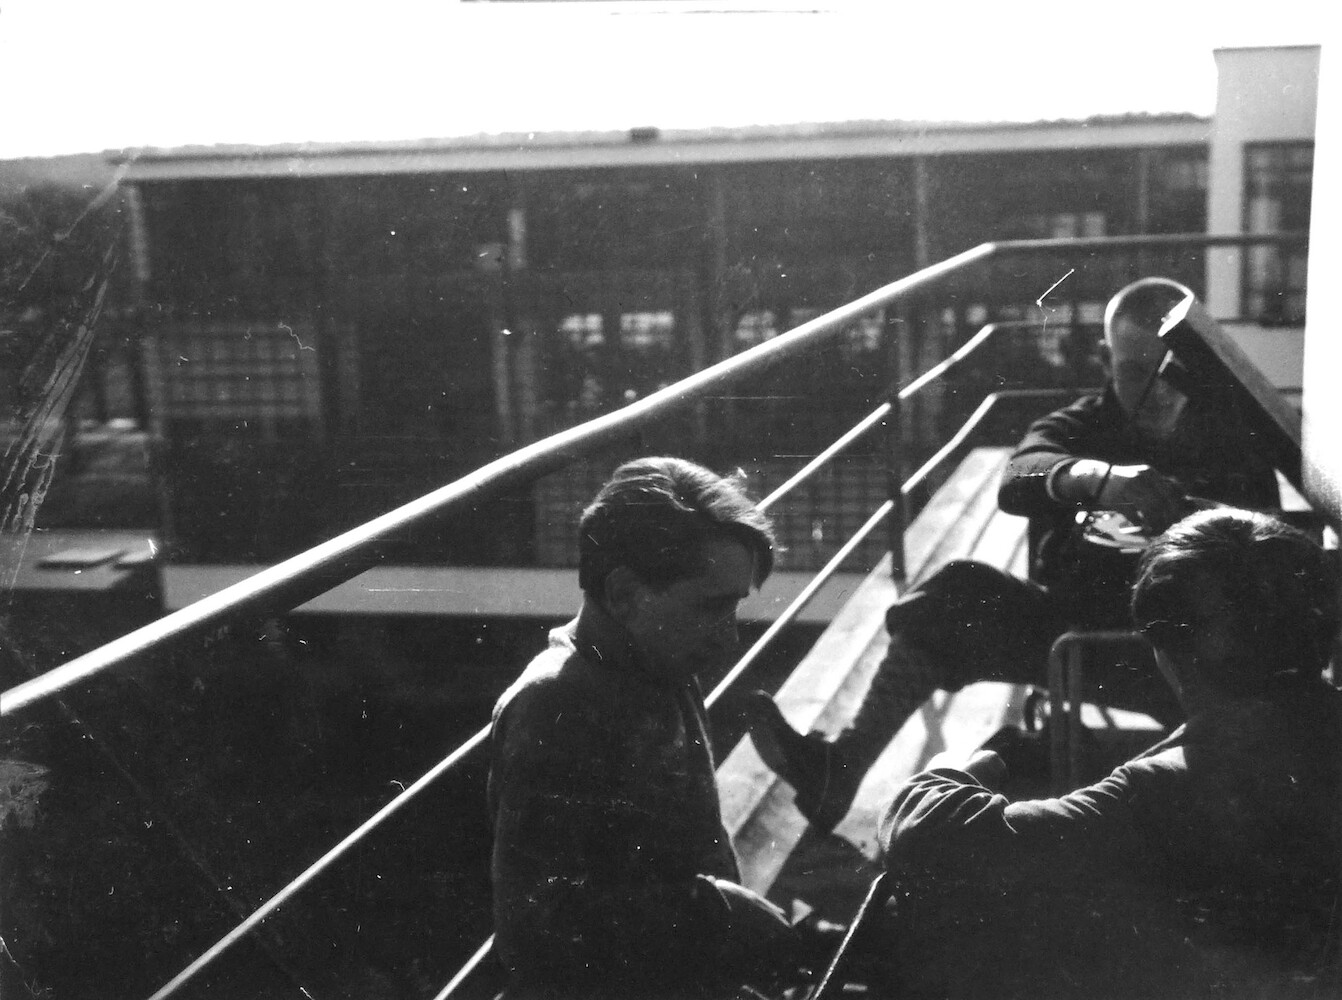 Karla Grosch, Georg Hartmann and NN on the Balcony at the Bauhaus with record player